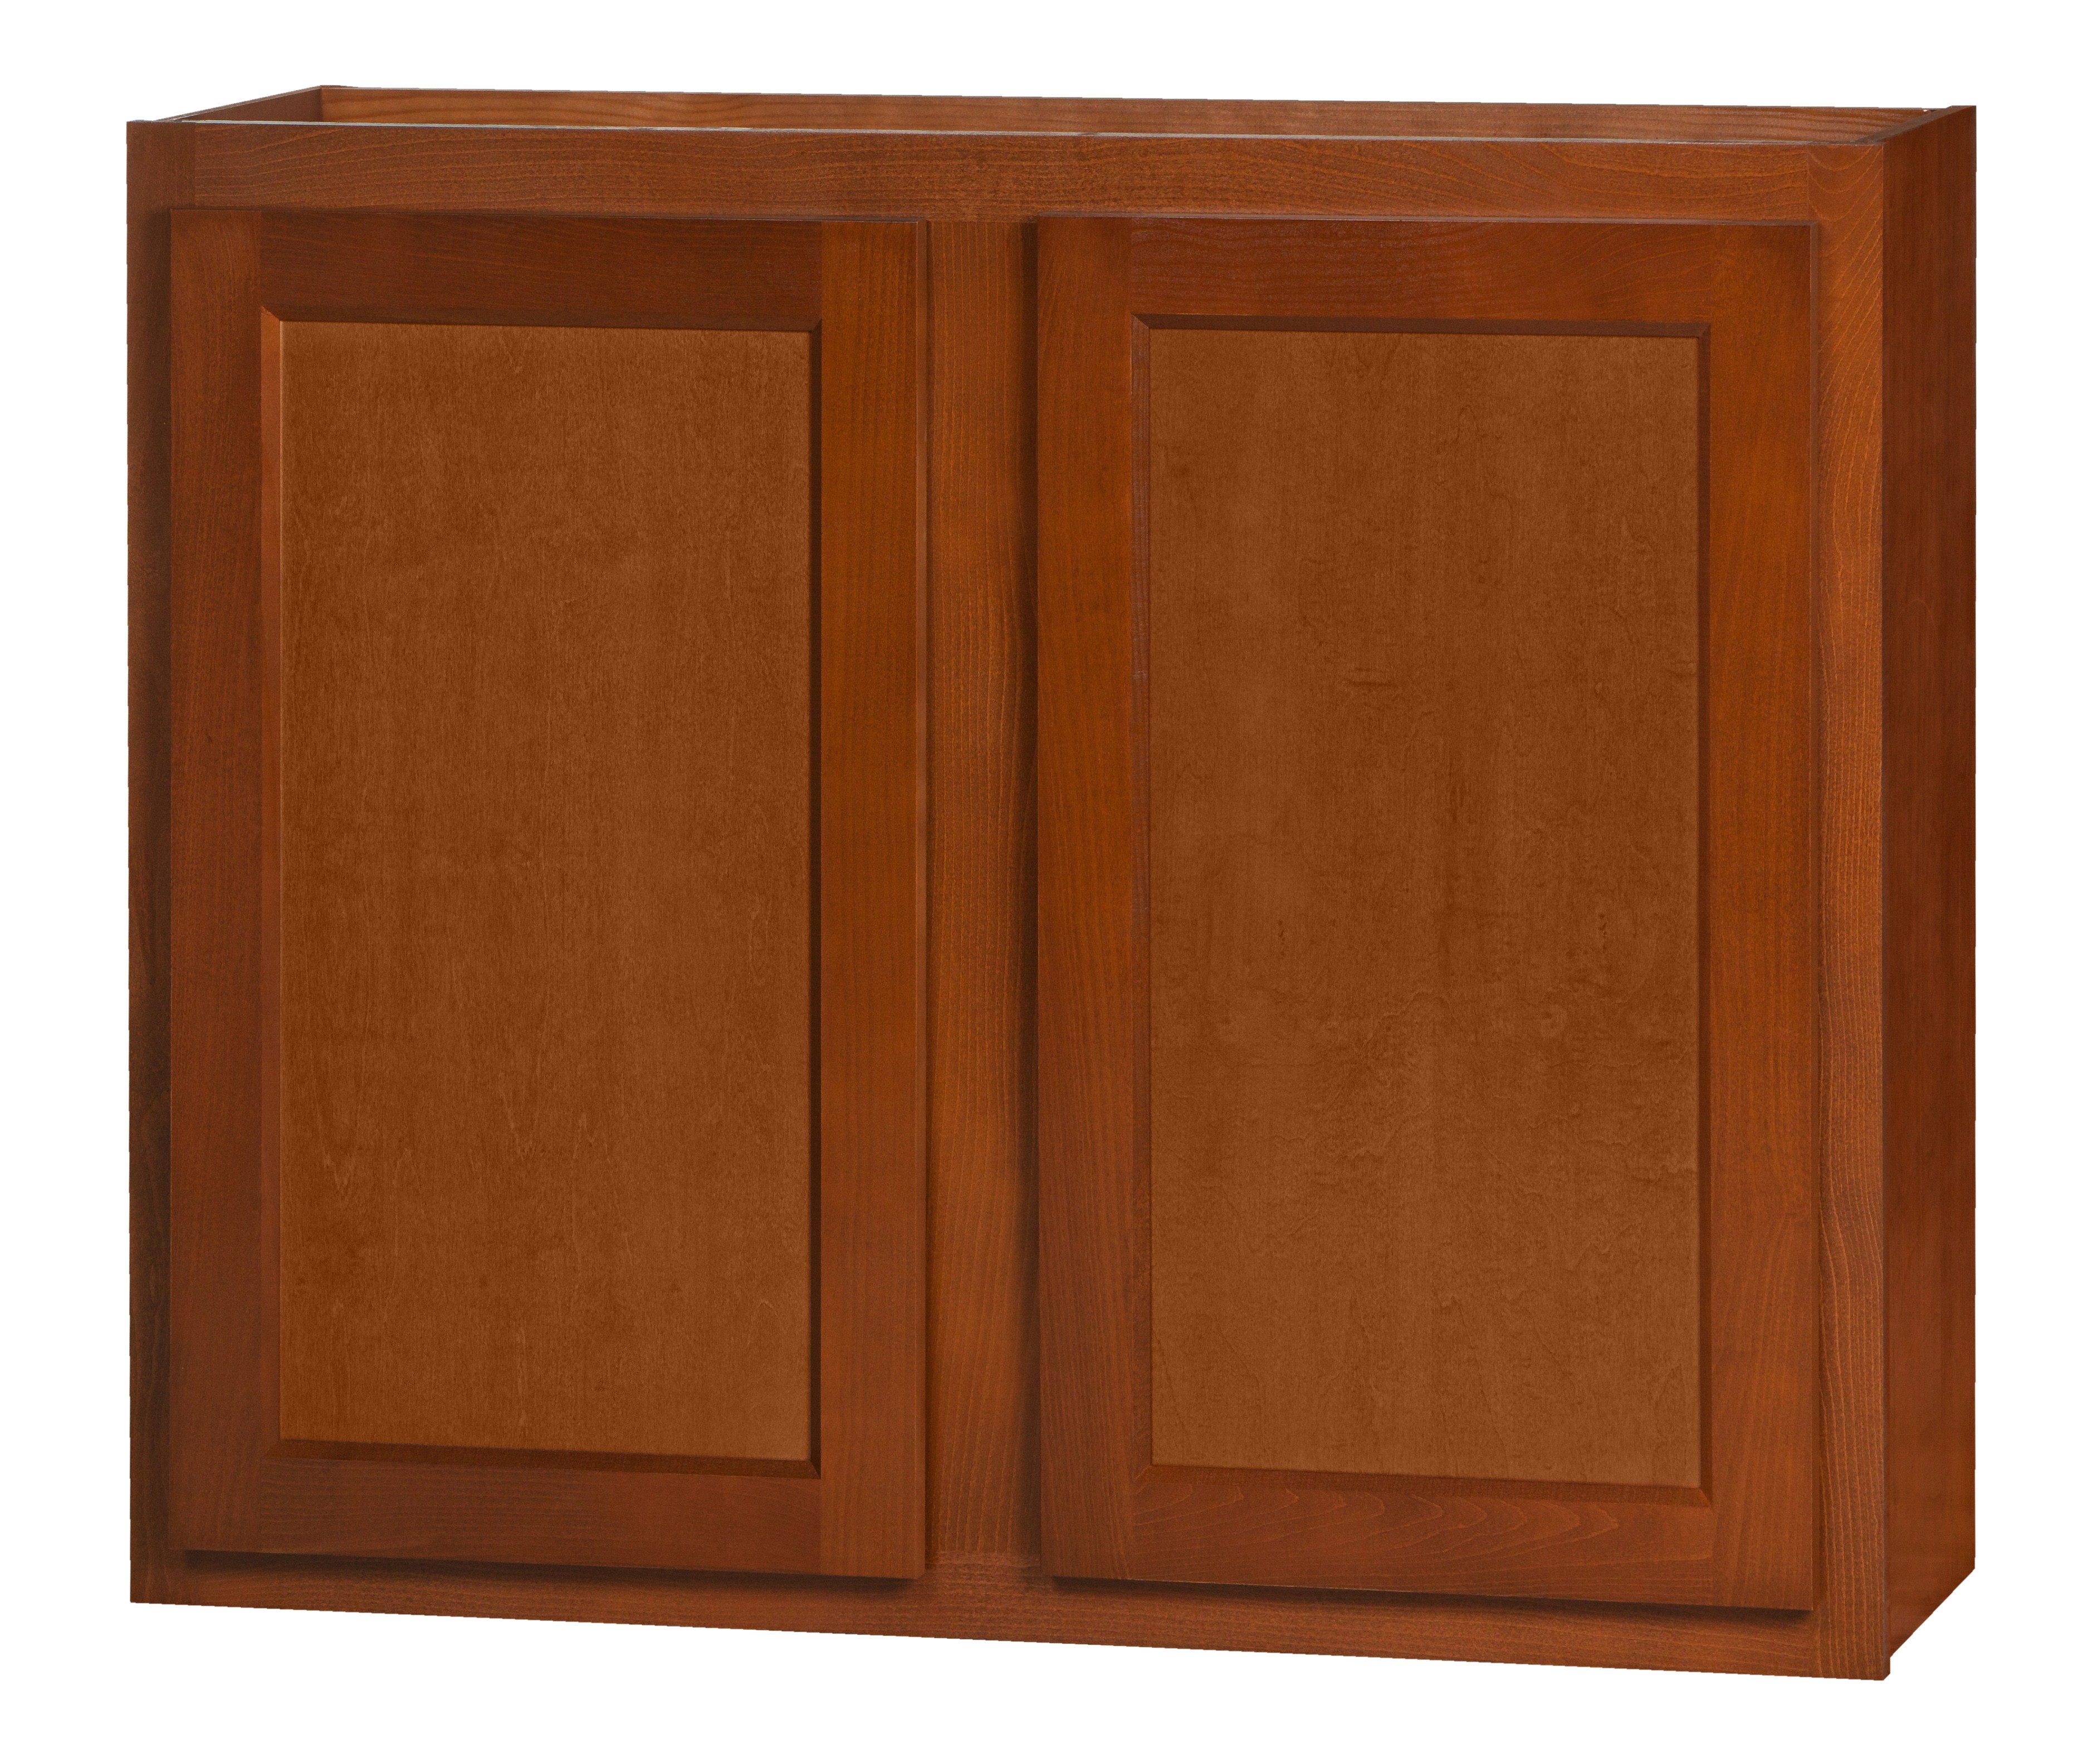 AMERICAN BUILDING PROD. 36W 36 x 30-Inch Glenwood Wall Cabinet at